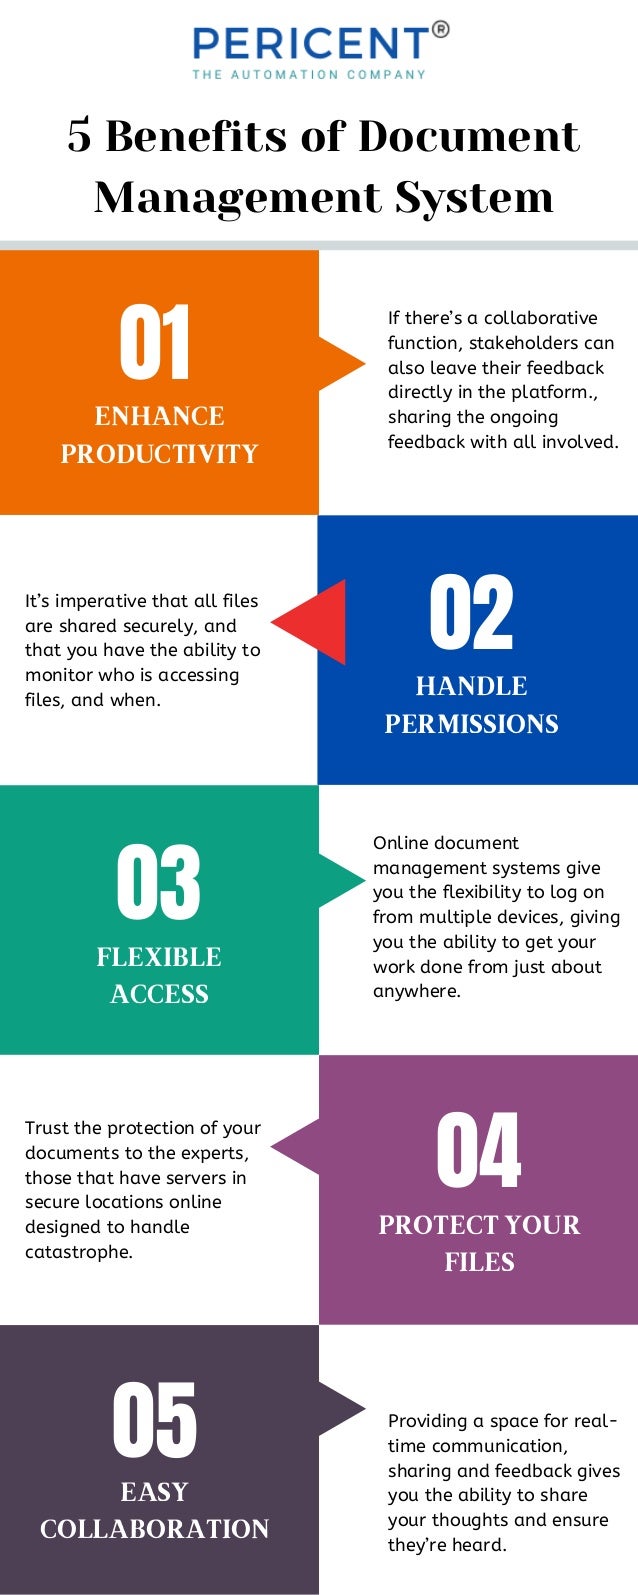 5 Benefits of Document
Management System


01
02
03
04
05
If there’s a collaborative
function, stakeholders can
also leave their feedback
directly in the platform.,
sharing the ongoing
feedback with all involved.
It’s imperative that all files
are shared securely, and
that you have the ability to
monitor who is accessing
files, and when.
Online document
management systems give
you the flexibility to log on
from multiple devices, giving
you the ability to get your
work done from just about
anywhere.
Trust the protection of your
documents to the experts,
those that have servers in
secure locations online
designed to handle
catastrophe.
Providing a space for real-
time communication,
sharing and feedback gives
you the ability to share
your thoughts and ensure
they’re heard.
ENHANCE
PRODUCTIVITY


HANDLE
PERMISSIONS


FLEXIBLE
ACCESS


PROTECT YOUR
FILES


EASY
COLLABORATION


 